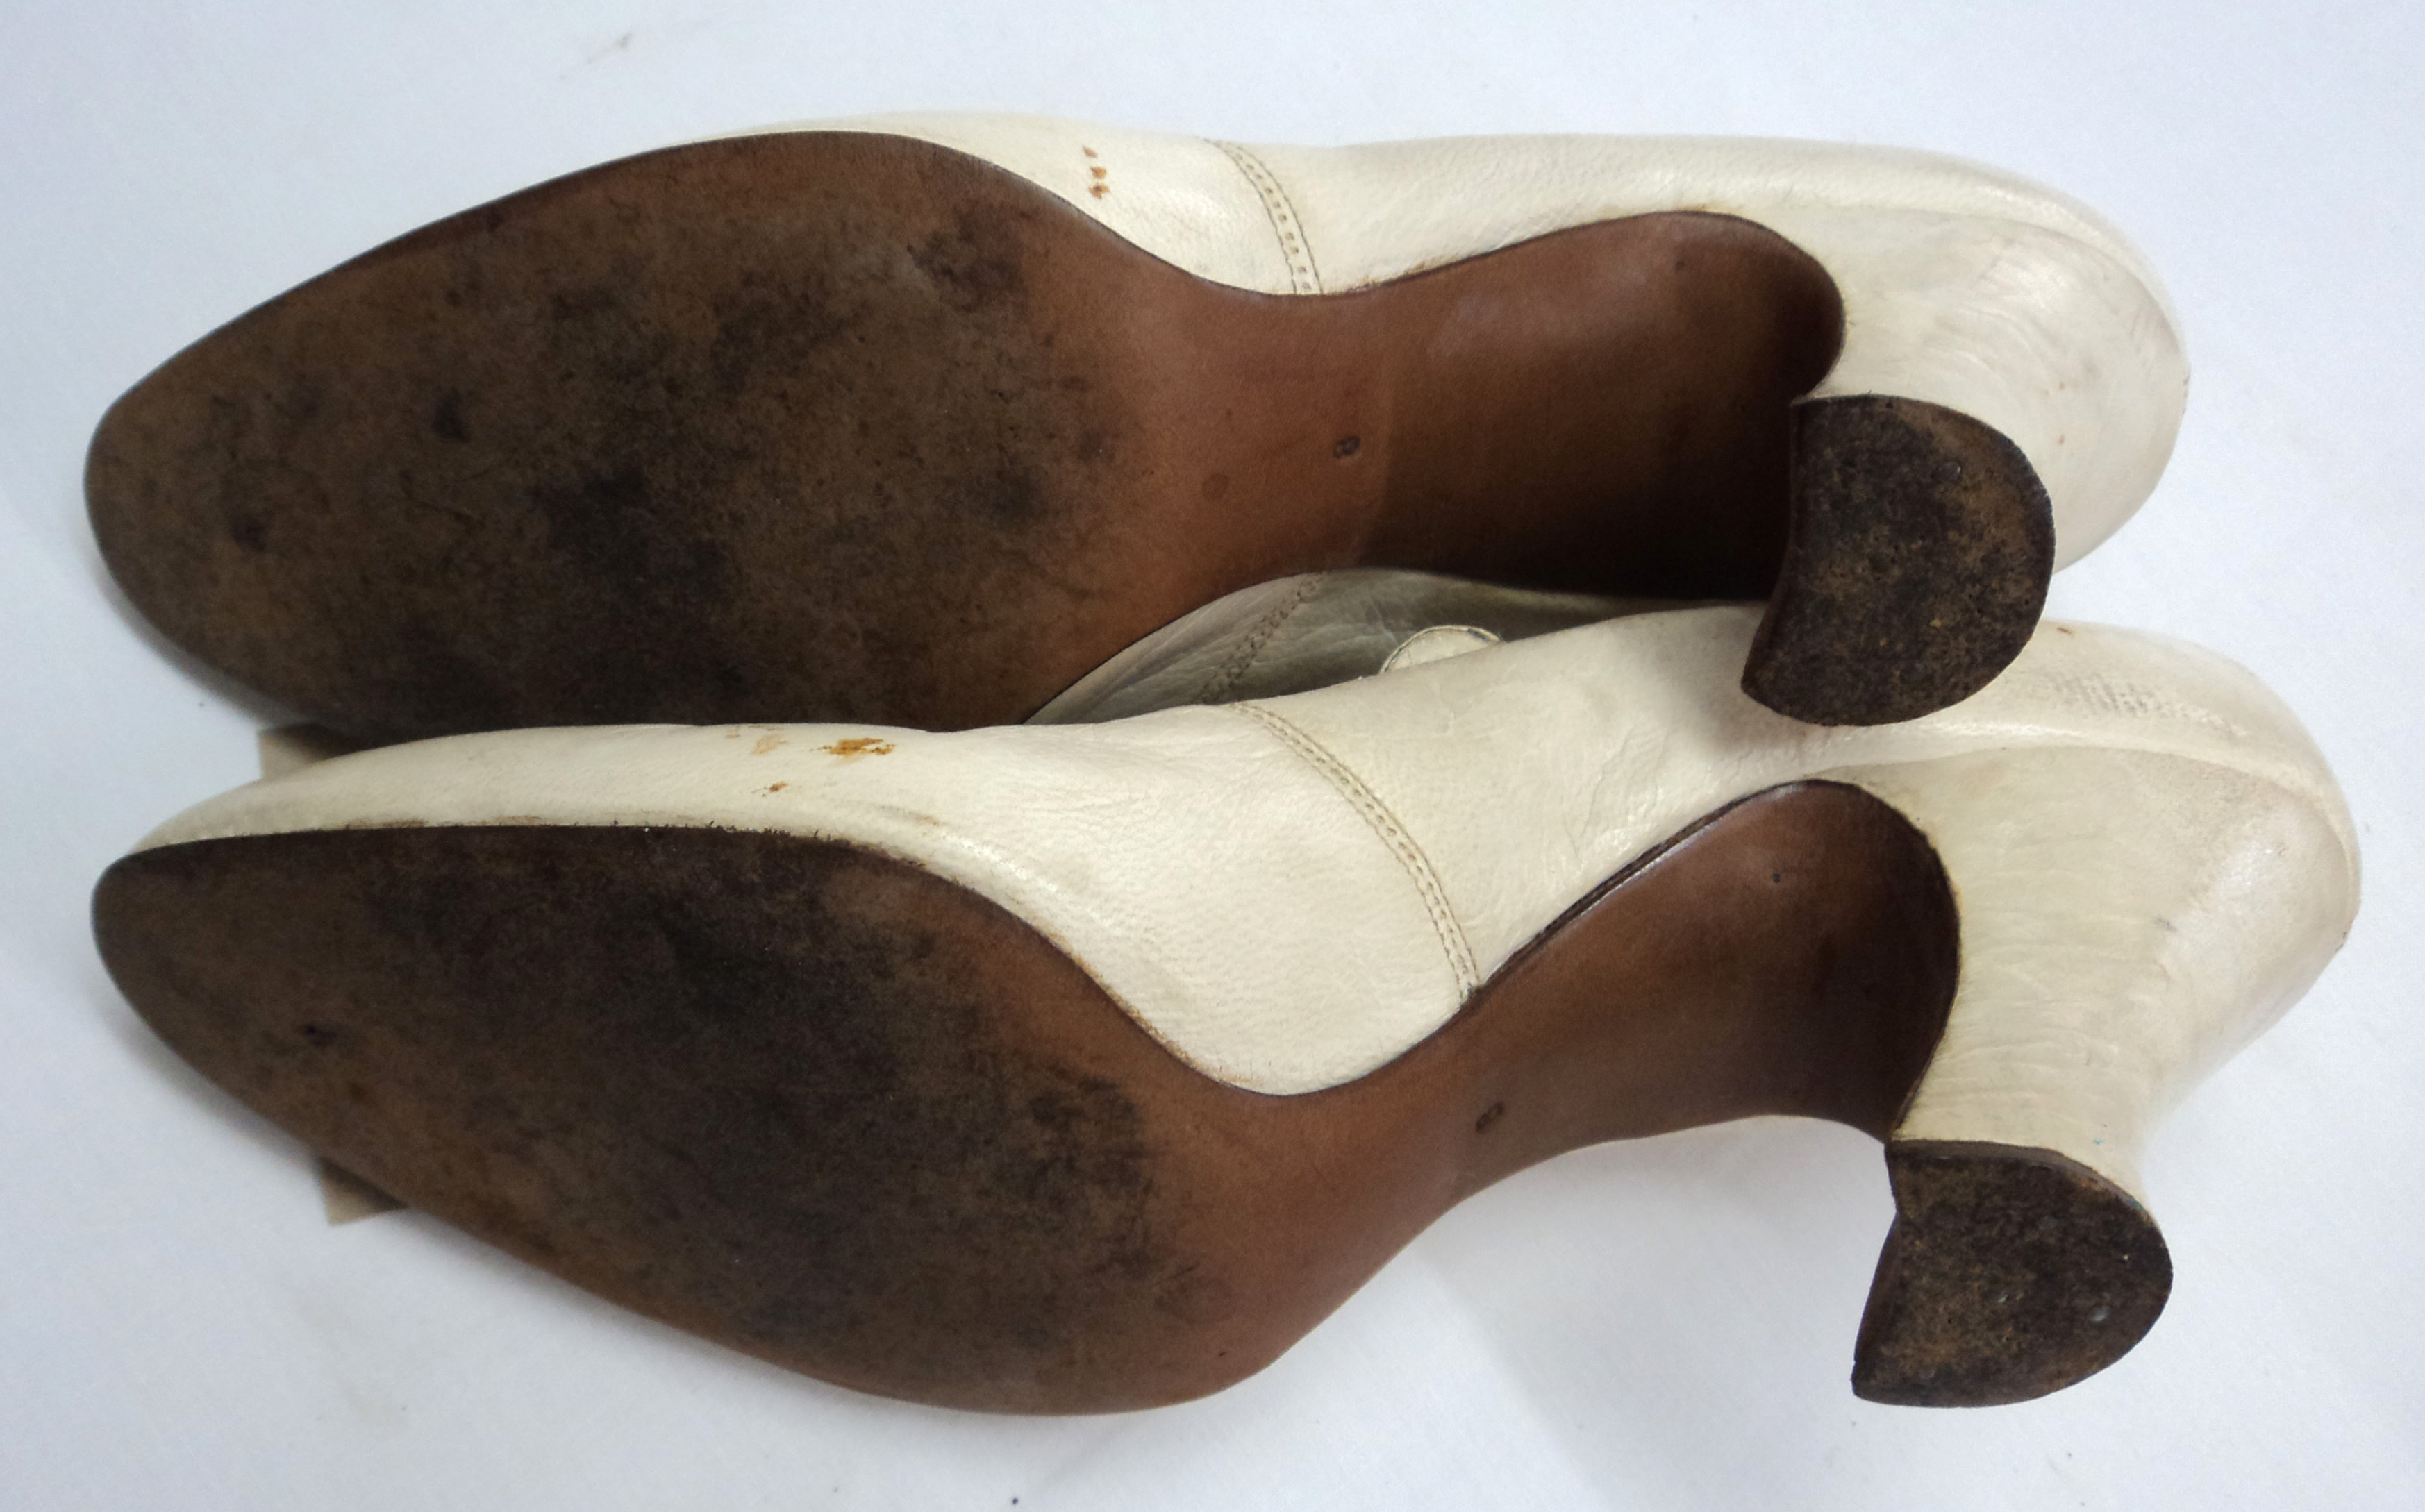 A collection of vintage ladies decorative evening shoes including leather Mary Janes, etc. - Image 5 of 13